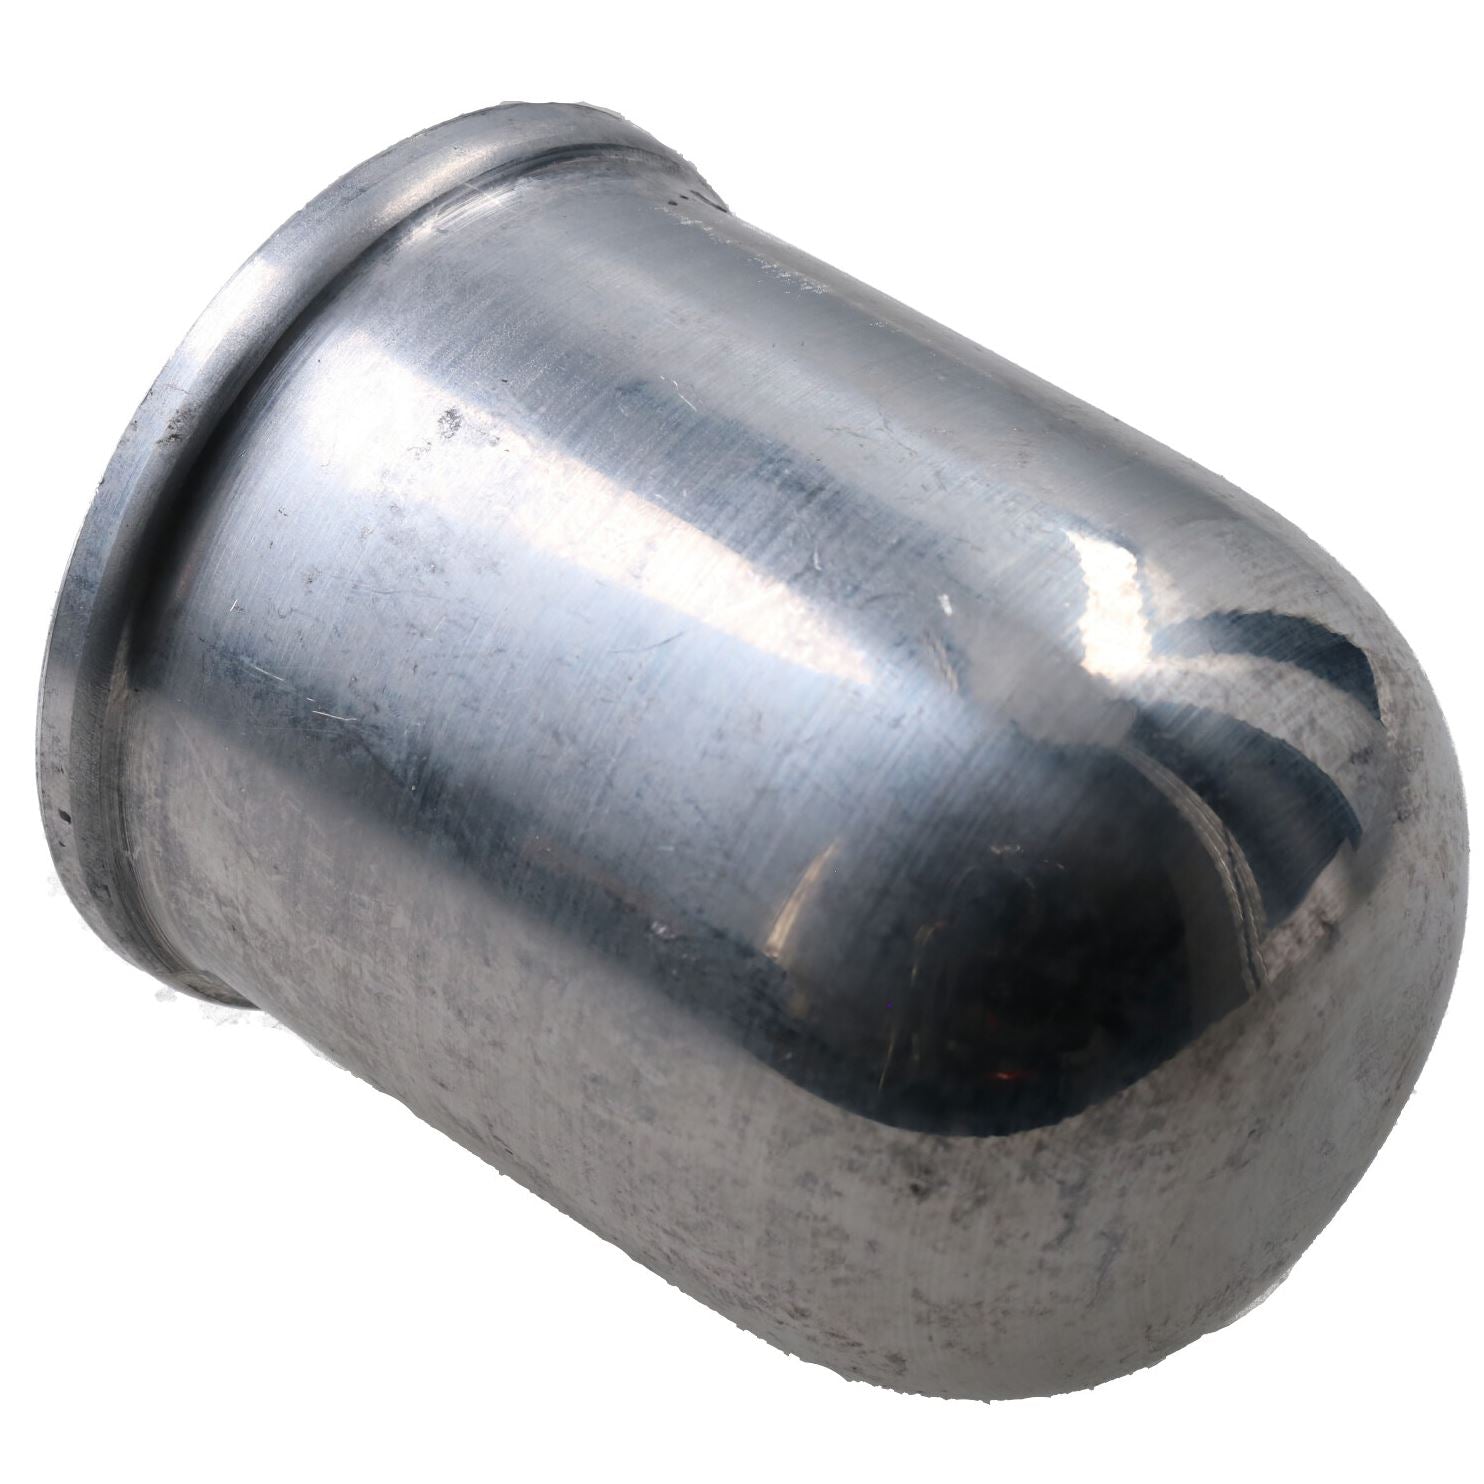 Aluminium Tow Ball Bar Cover fits all 50mm Tow Balls Polished Finish